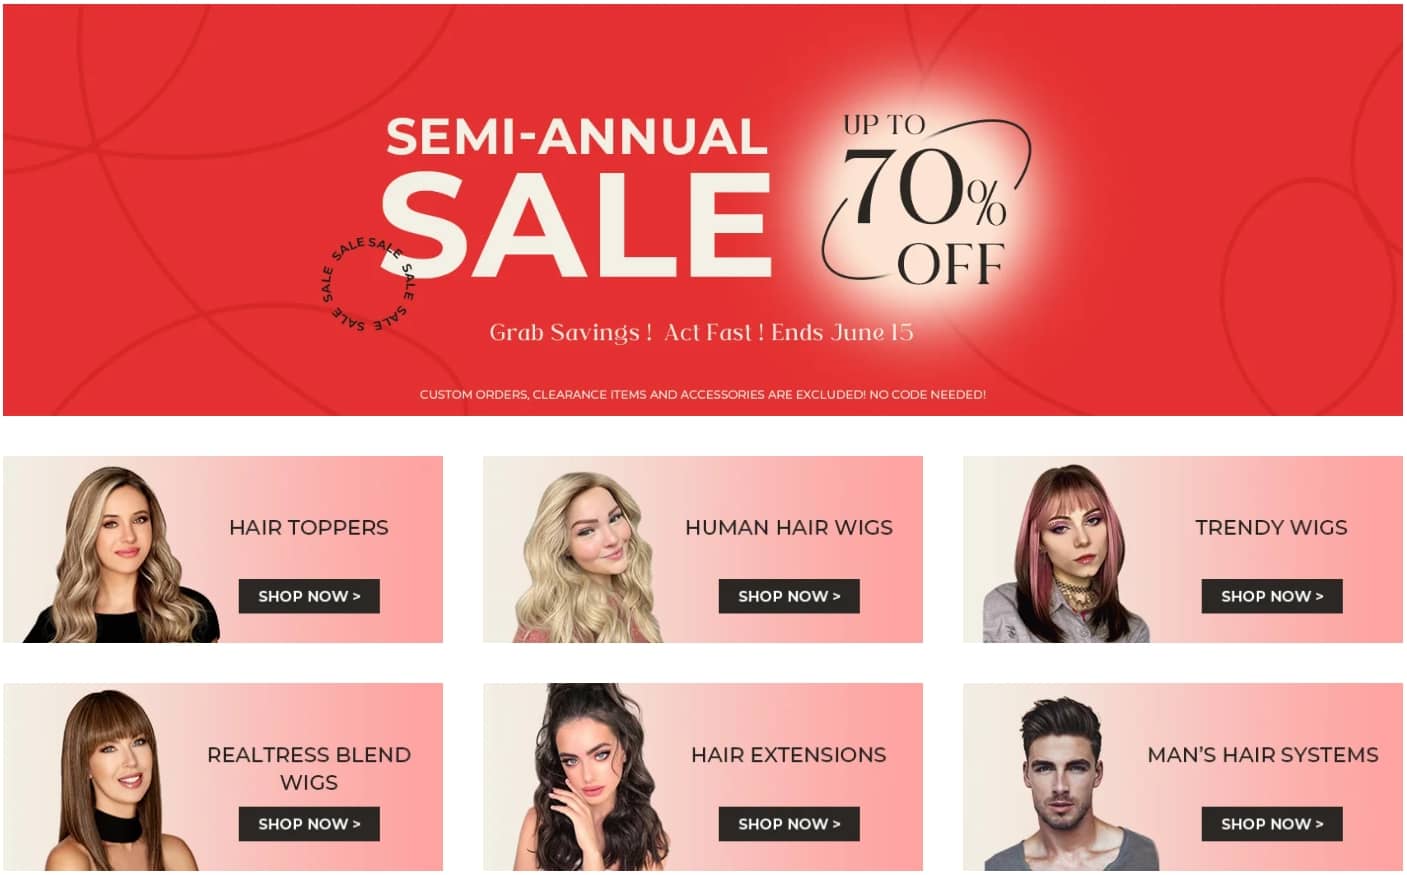 Up to 70% Off-Semi-Annual Sale...